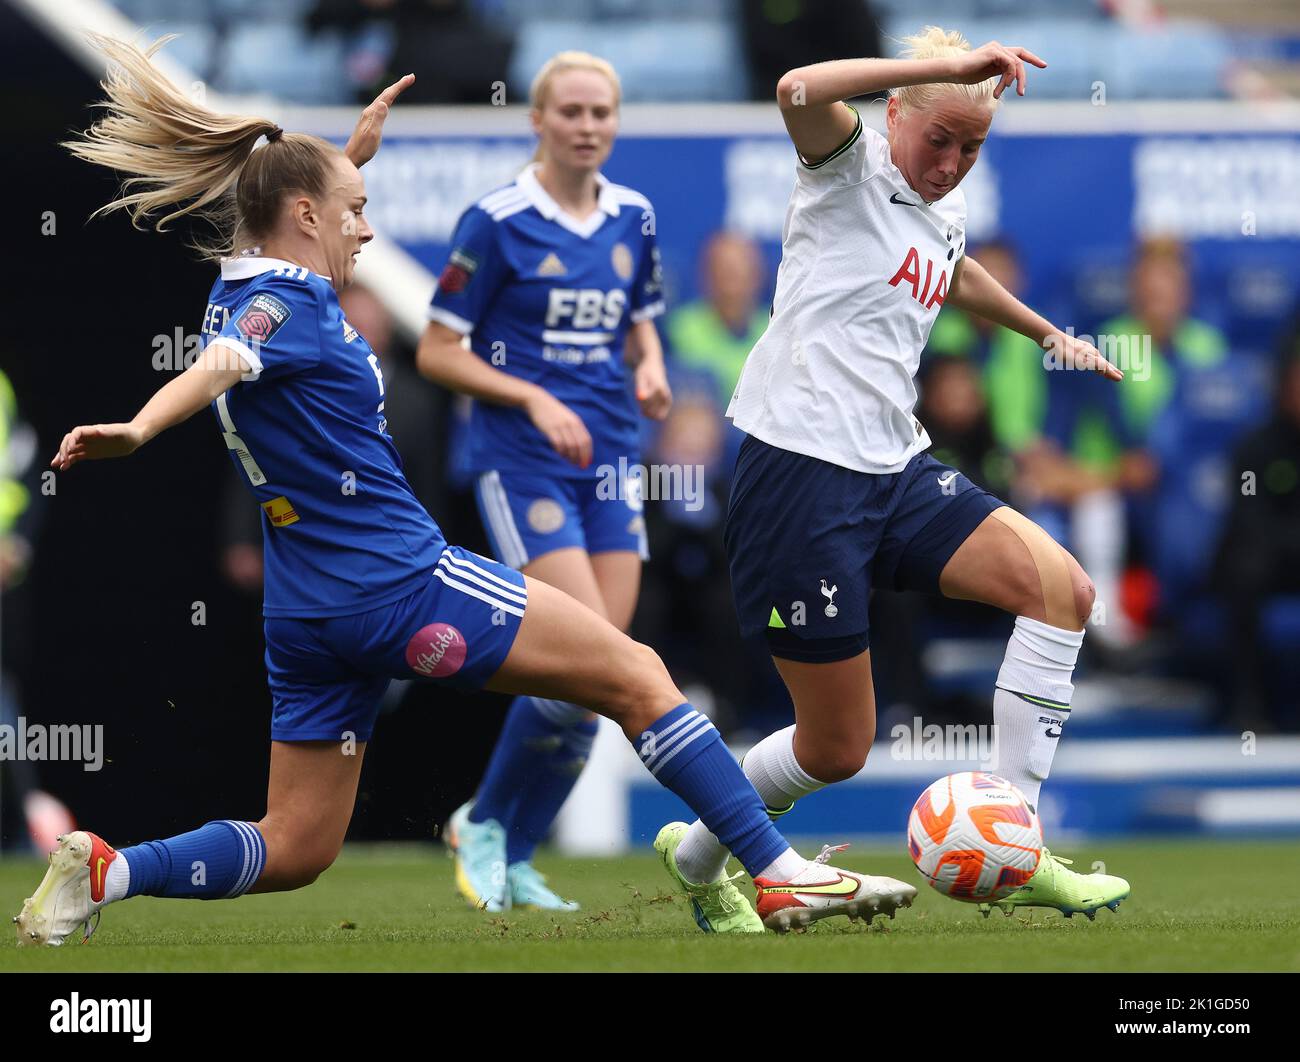 Leicester, UK. 18th September 2022.  Josie Green of Leicester City (L) challenges Eveliina Summanen of Tottenham Hotspur during the The FA Women's Super League match at the King Power Stadium, Leicester. Picture credit should read: Darren Staples / Sportimage Credit: Sportimage/Alamy Live News Stock Photo